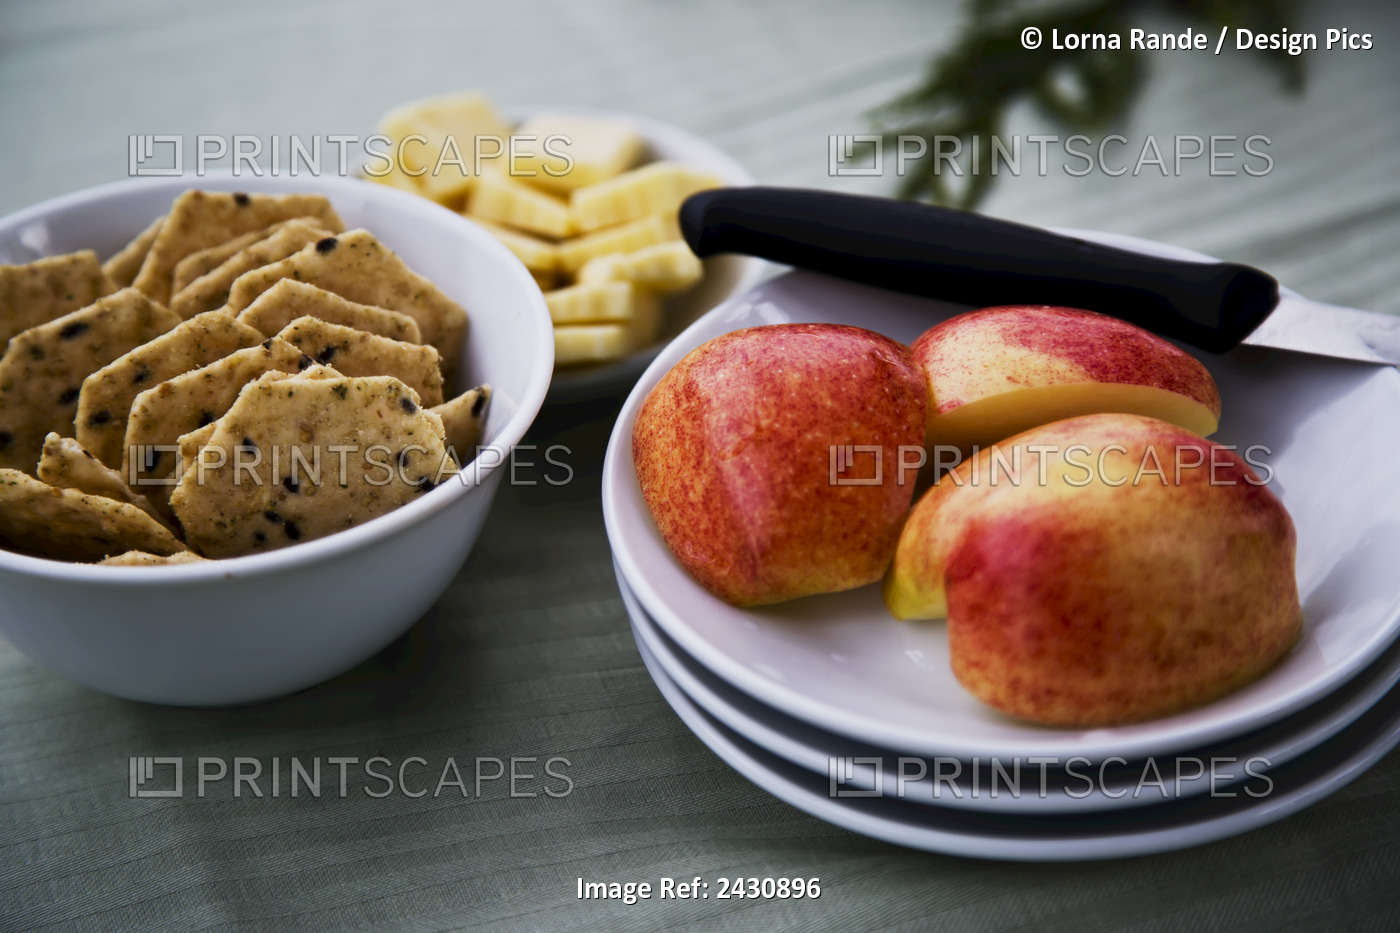 A Snack Of Cut Apples, Crackers And Cheese; Abbotsford, British Columbia, Canada